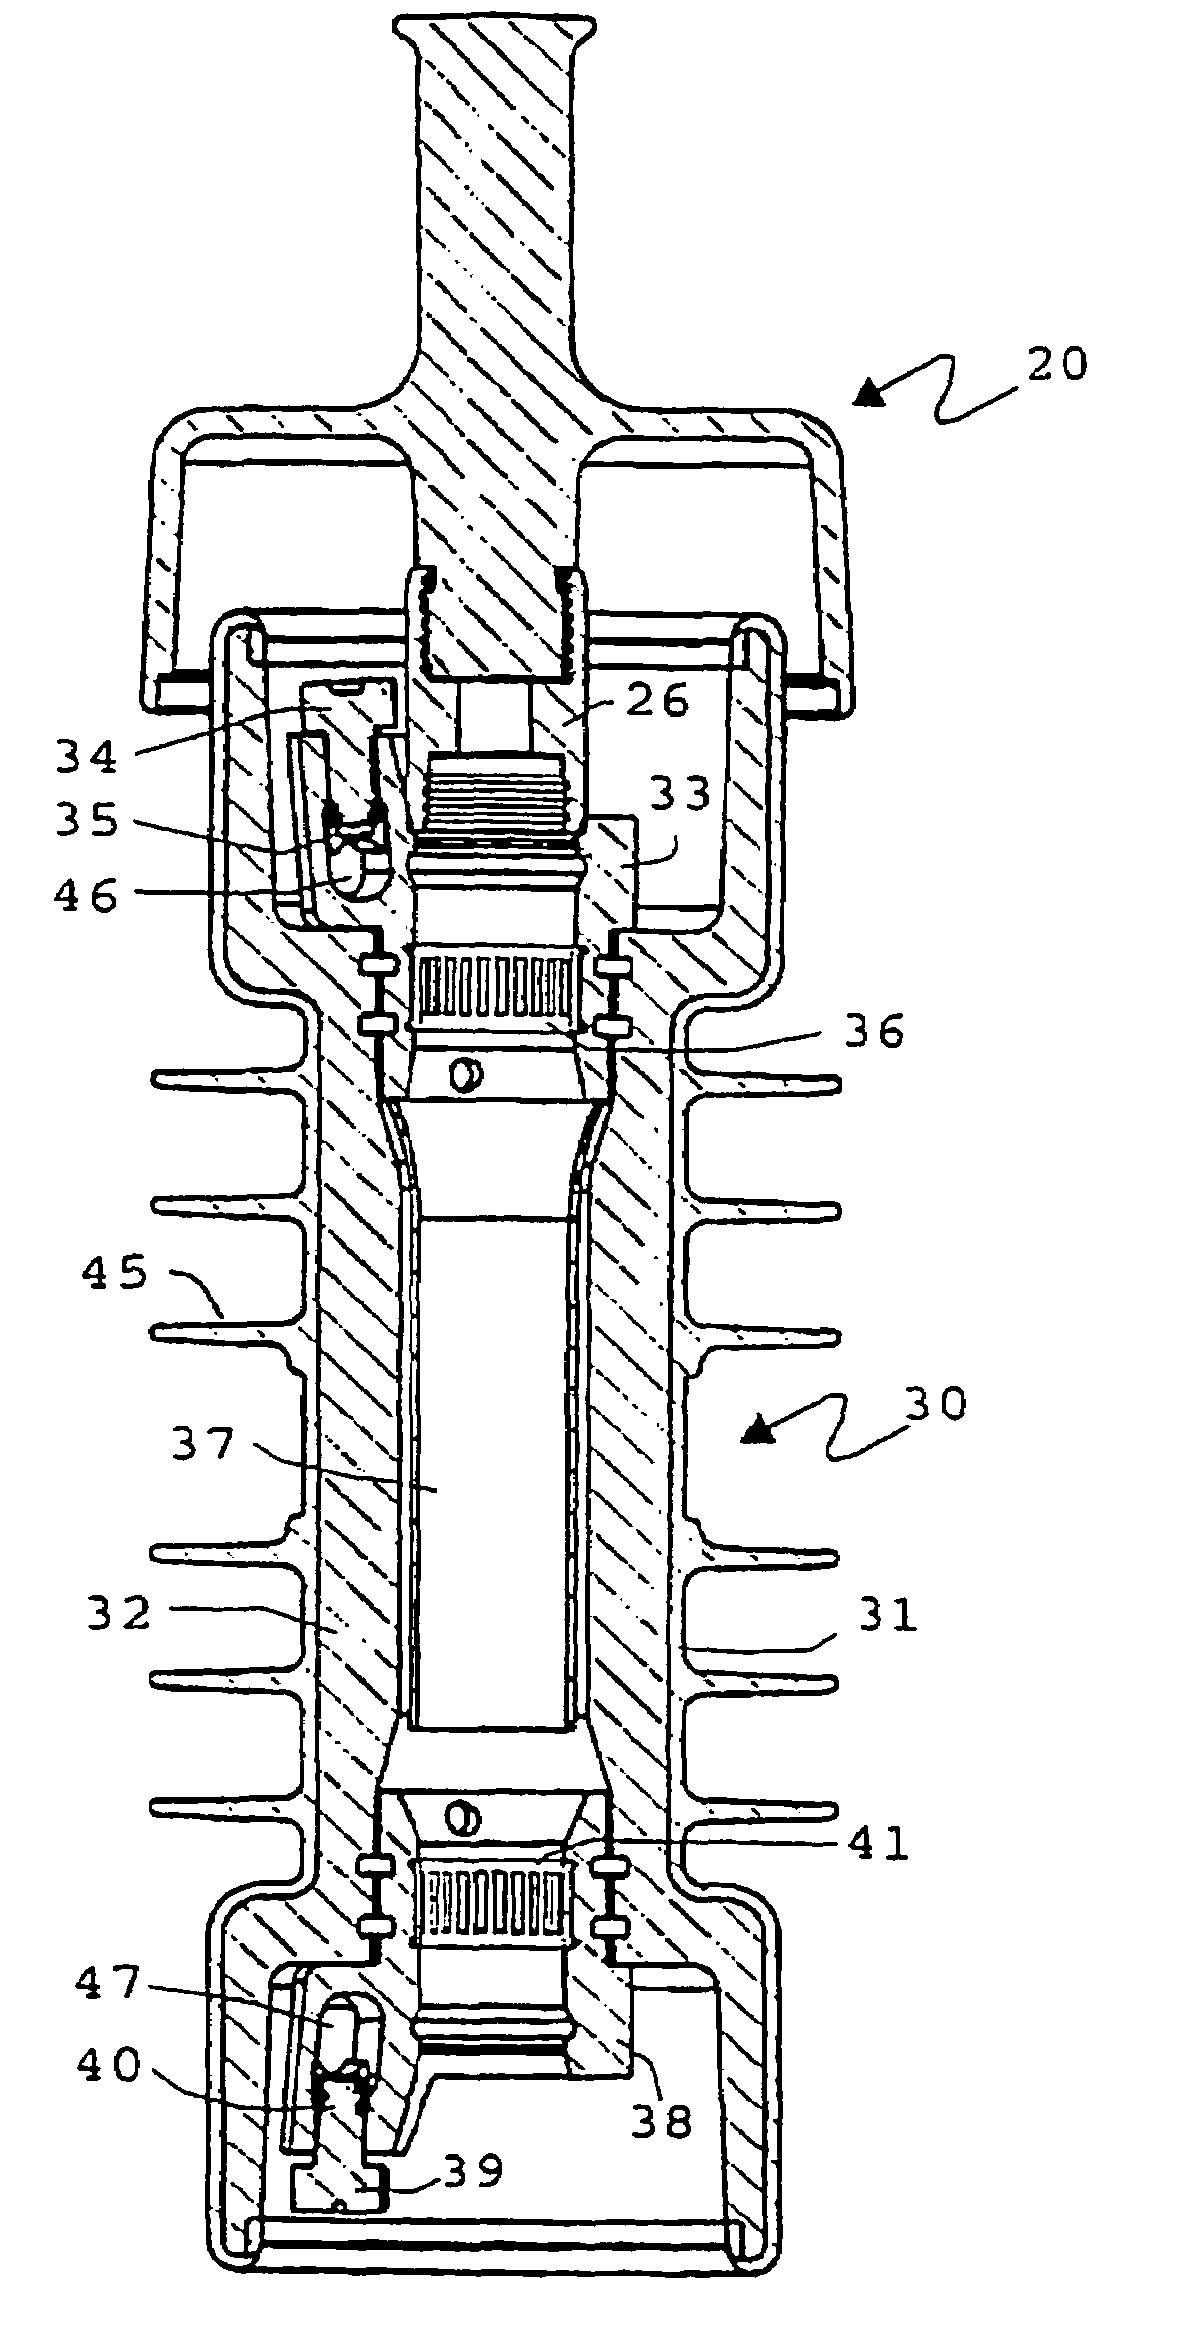 Enclosed Insulator Assembly for High-Voltage Distribution Systems